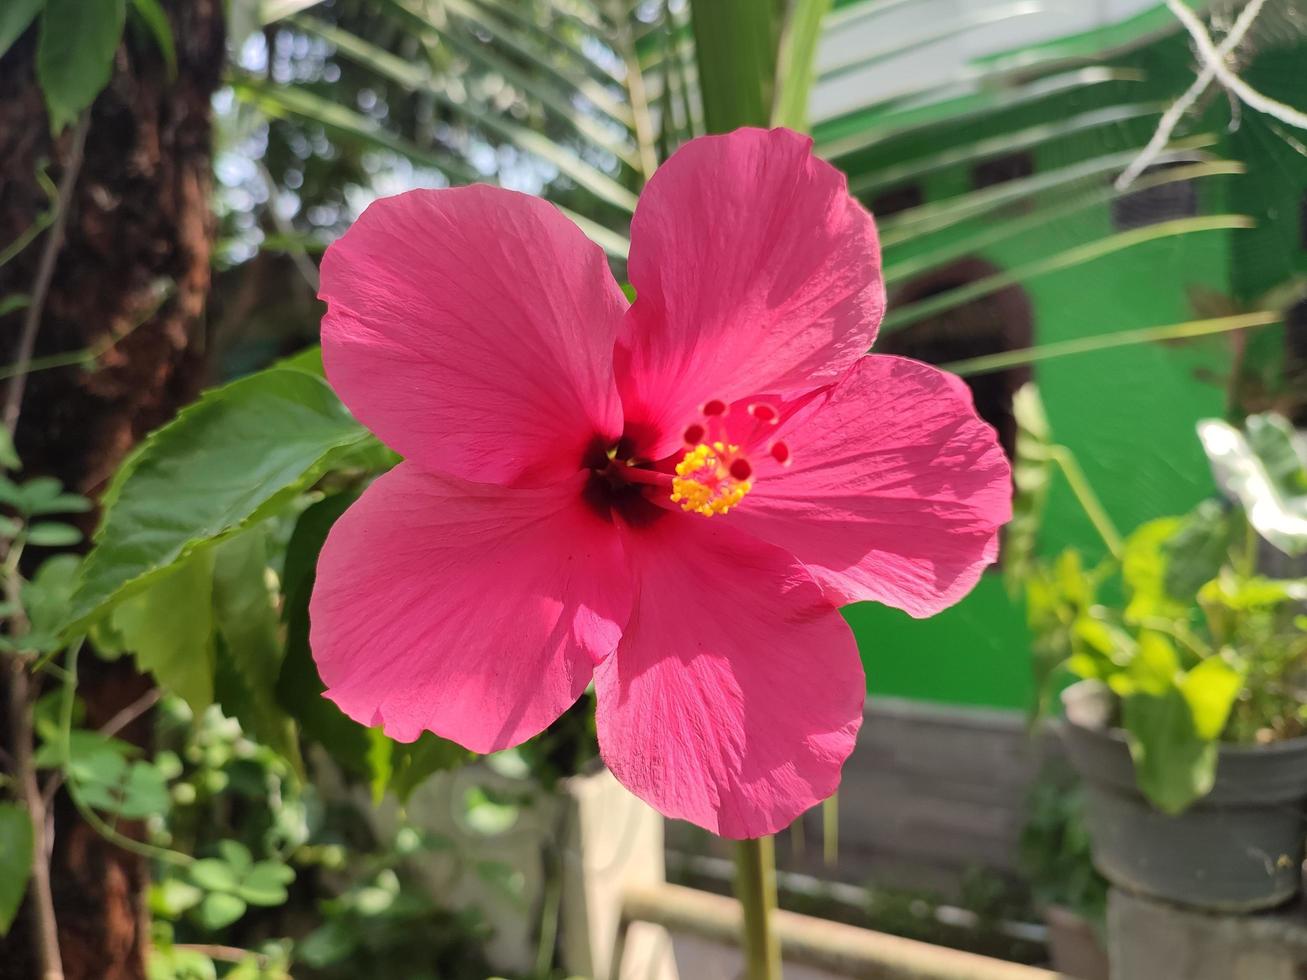 hibiscus flowering plant with the scientific name Hibiscus rosa-sinensis grows very beautifully in the yard photo